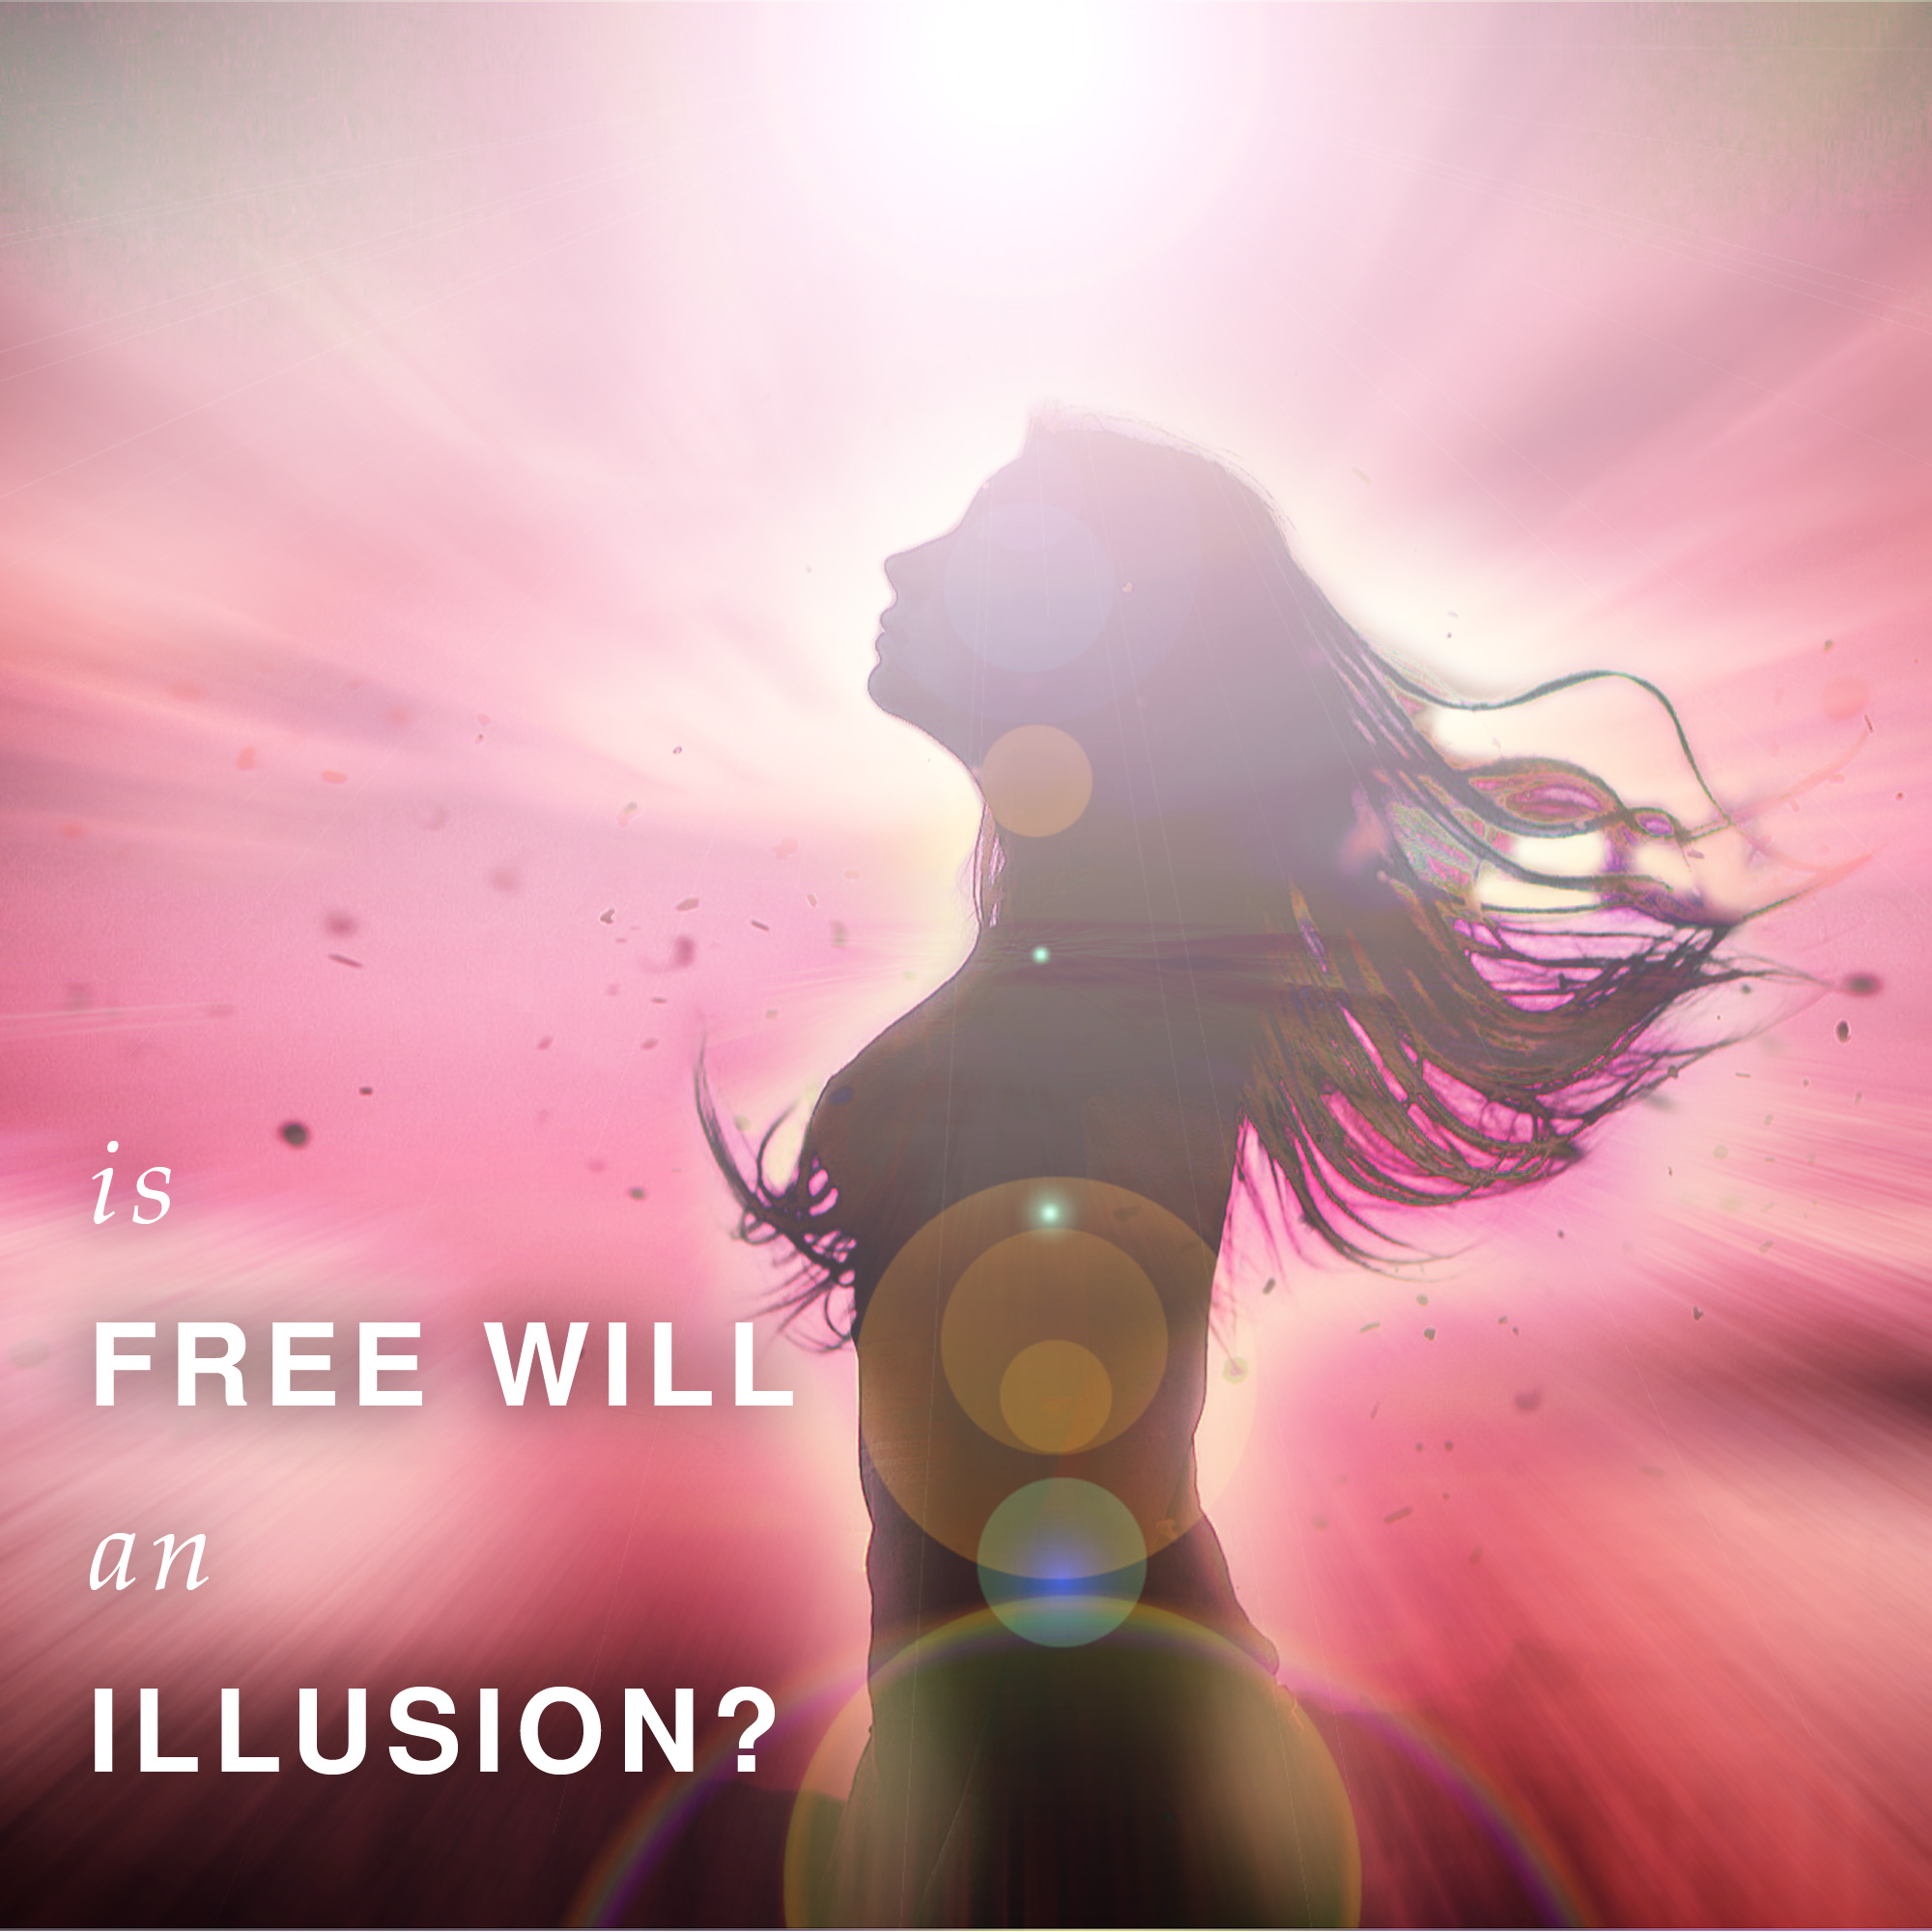 Is free will an illusion